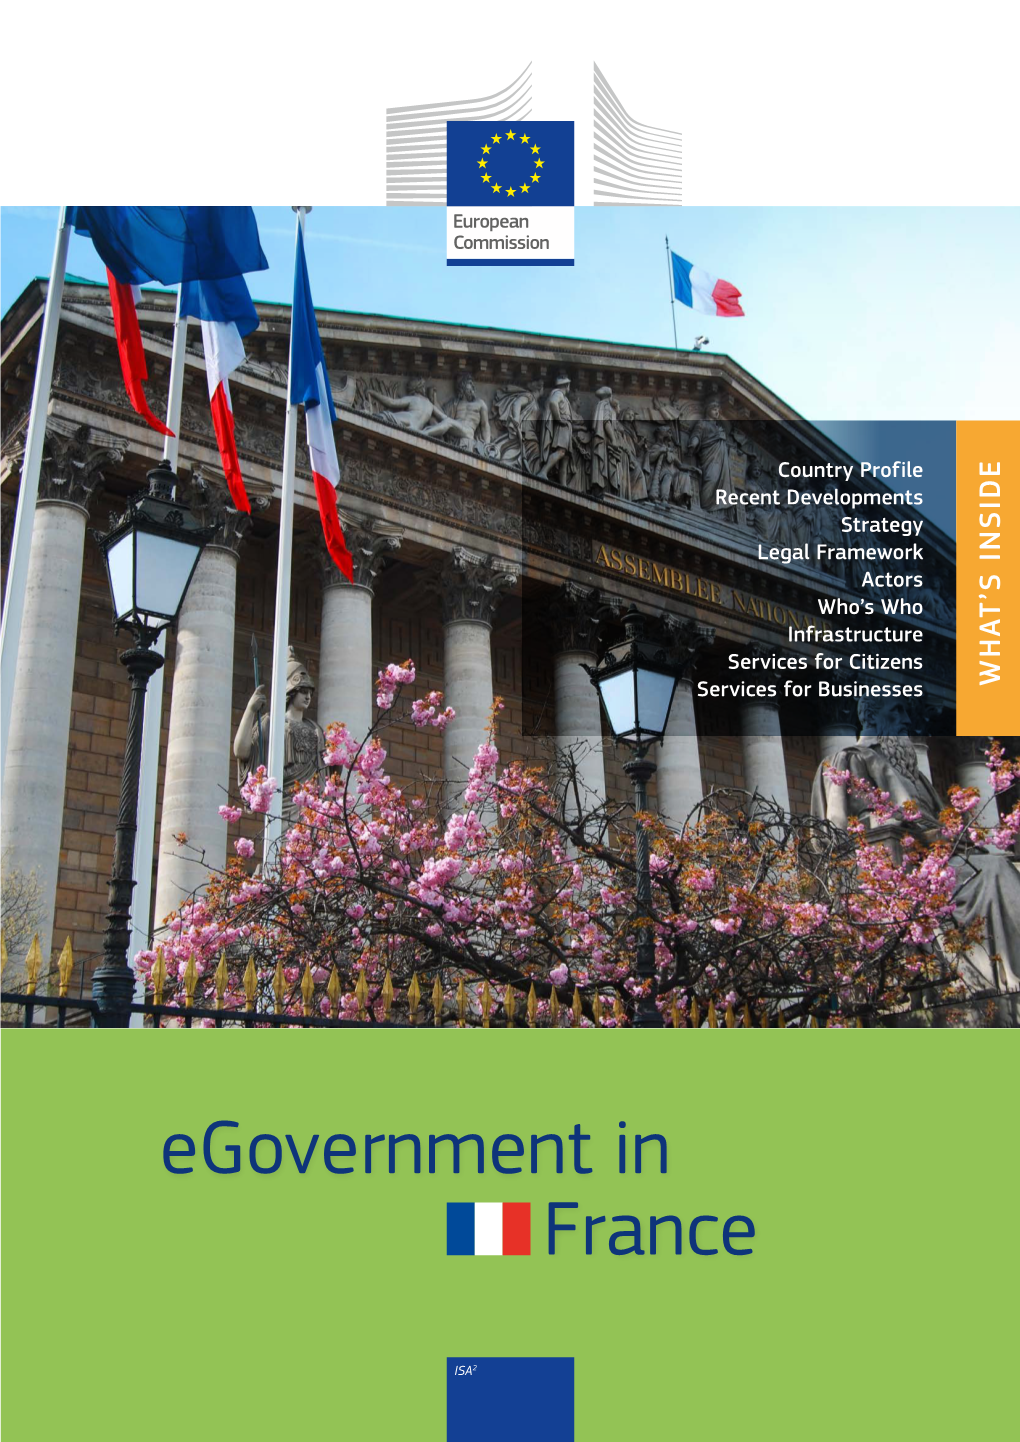 Egovernment in France